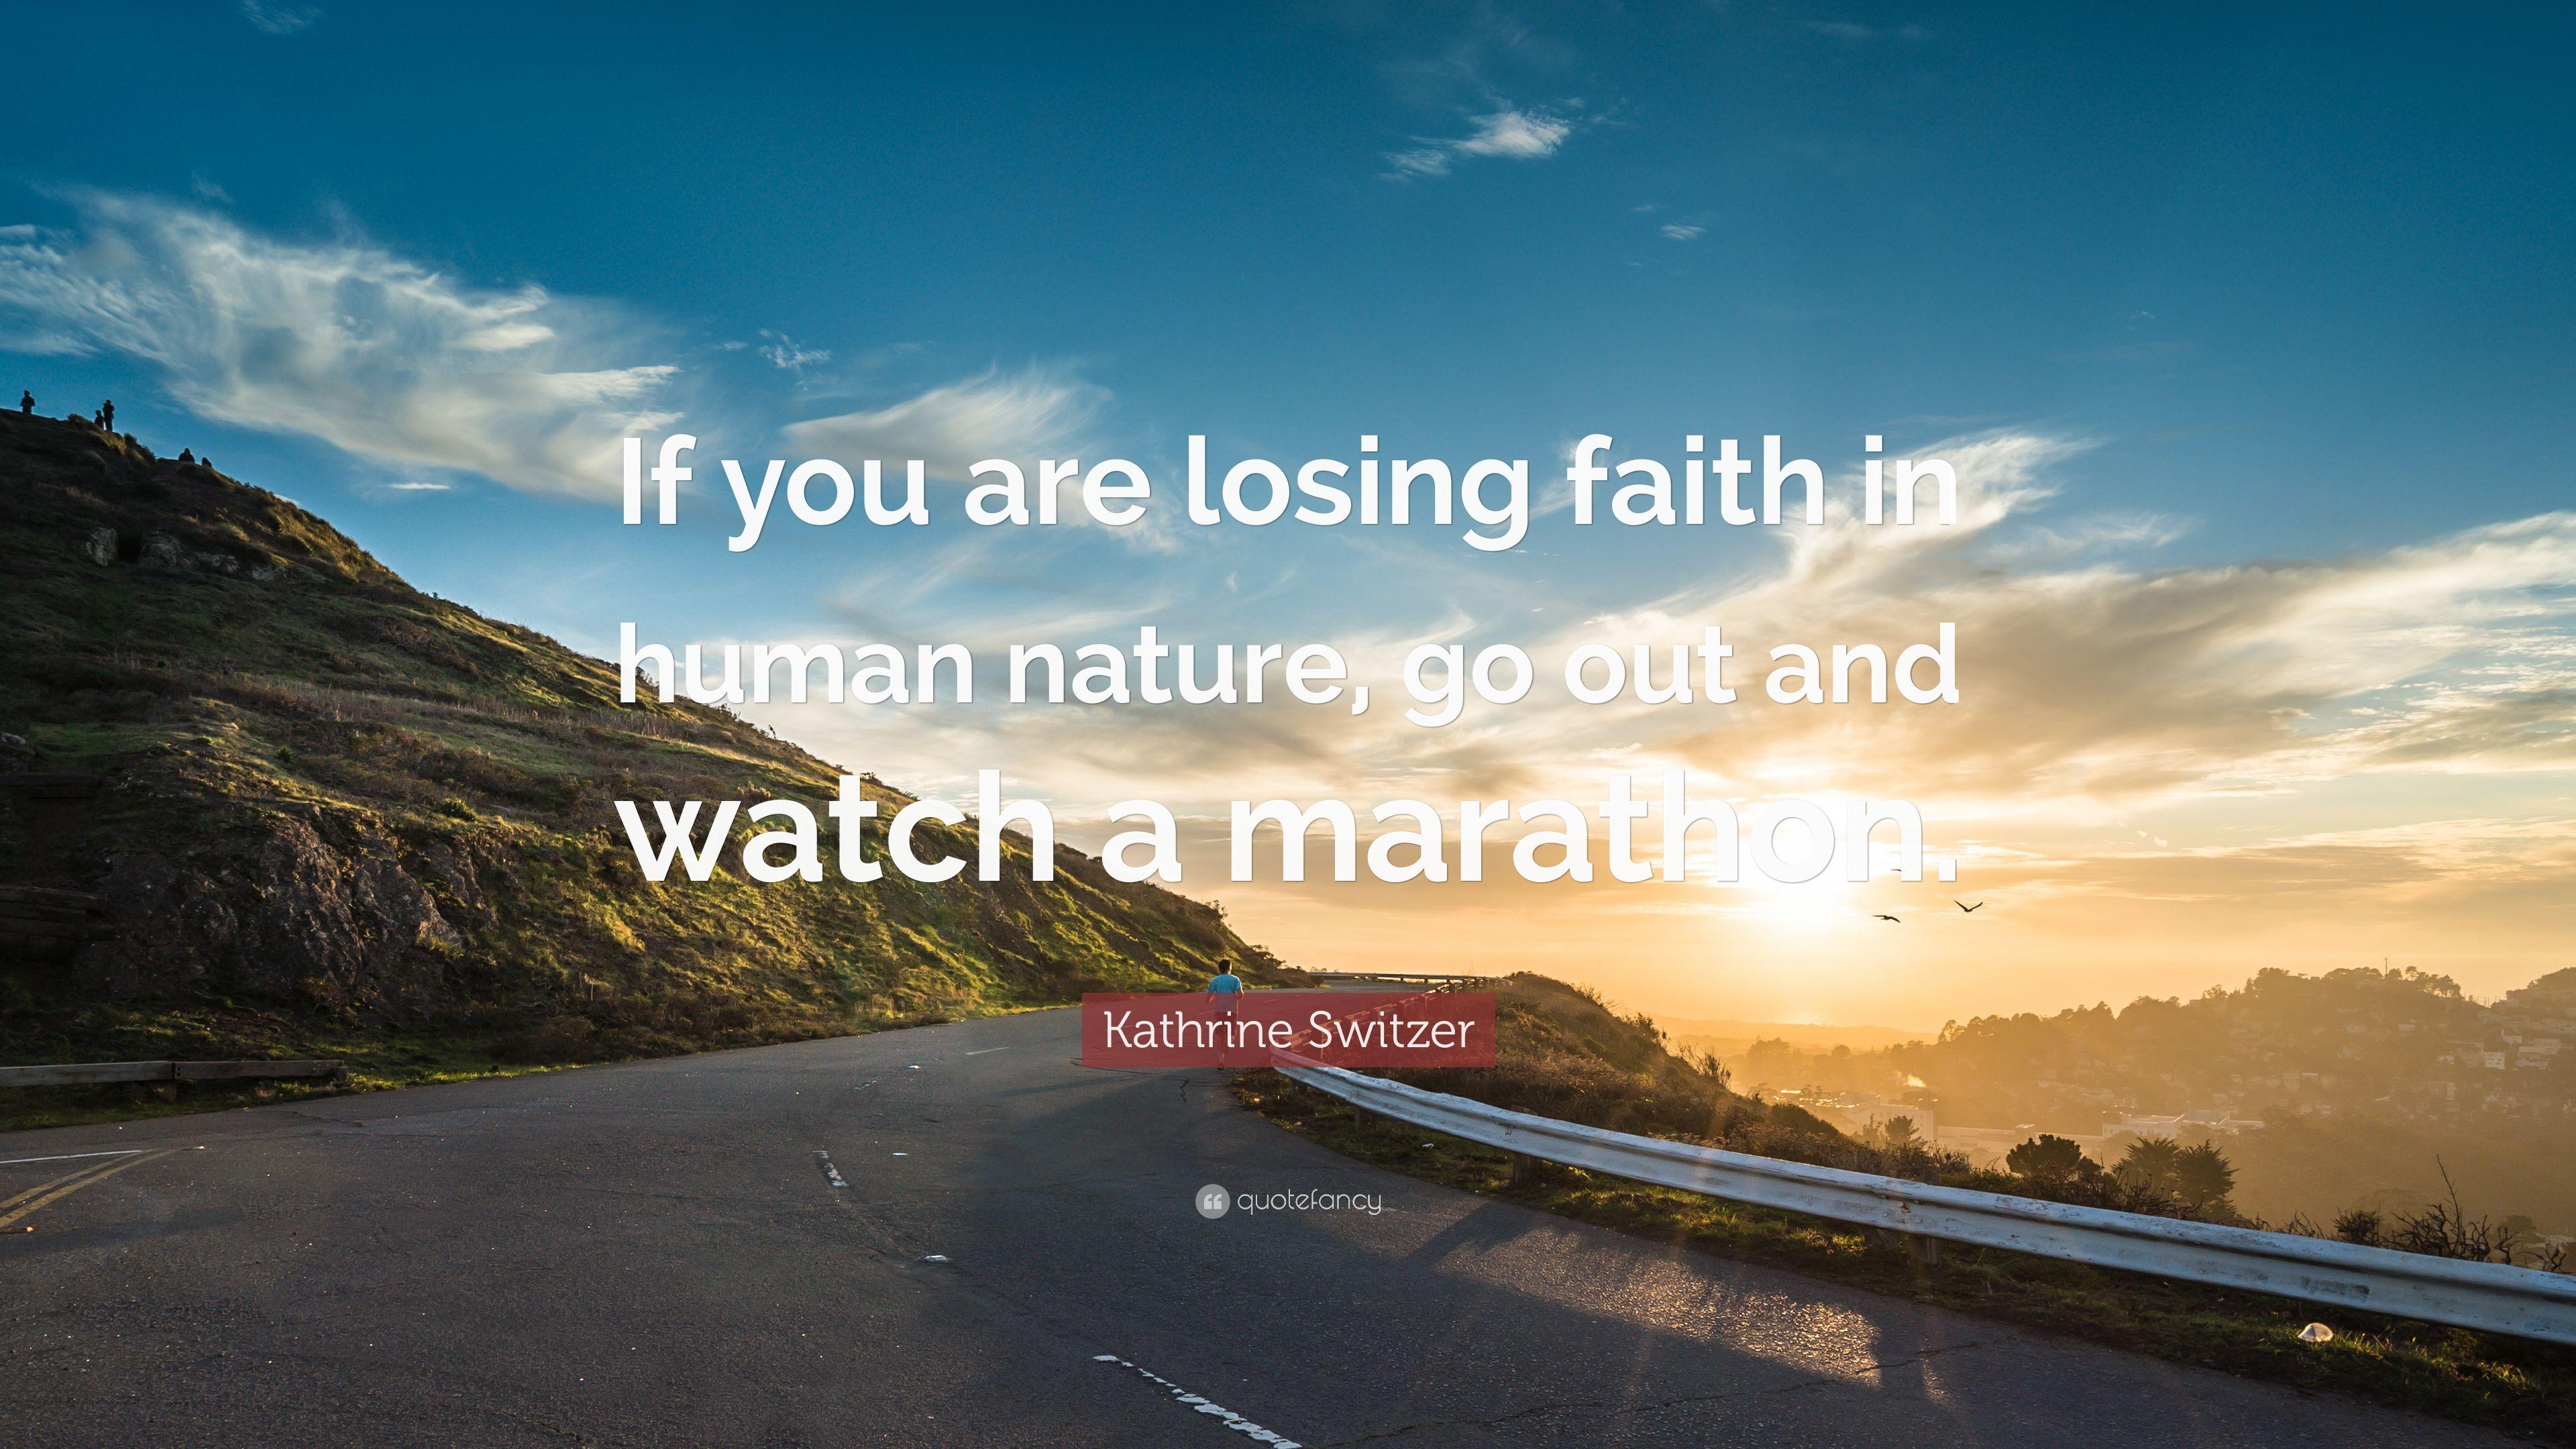 Kathrine Switzer Quote: “If you are losing faith in human nature